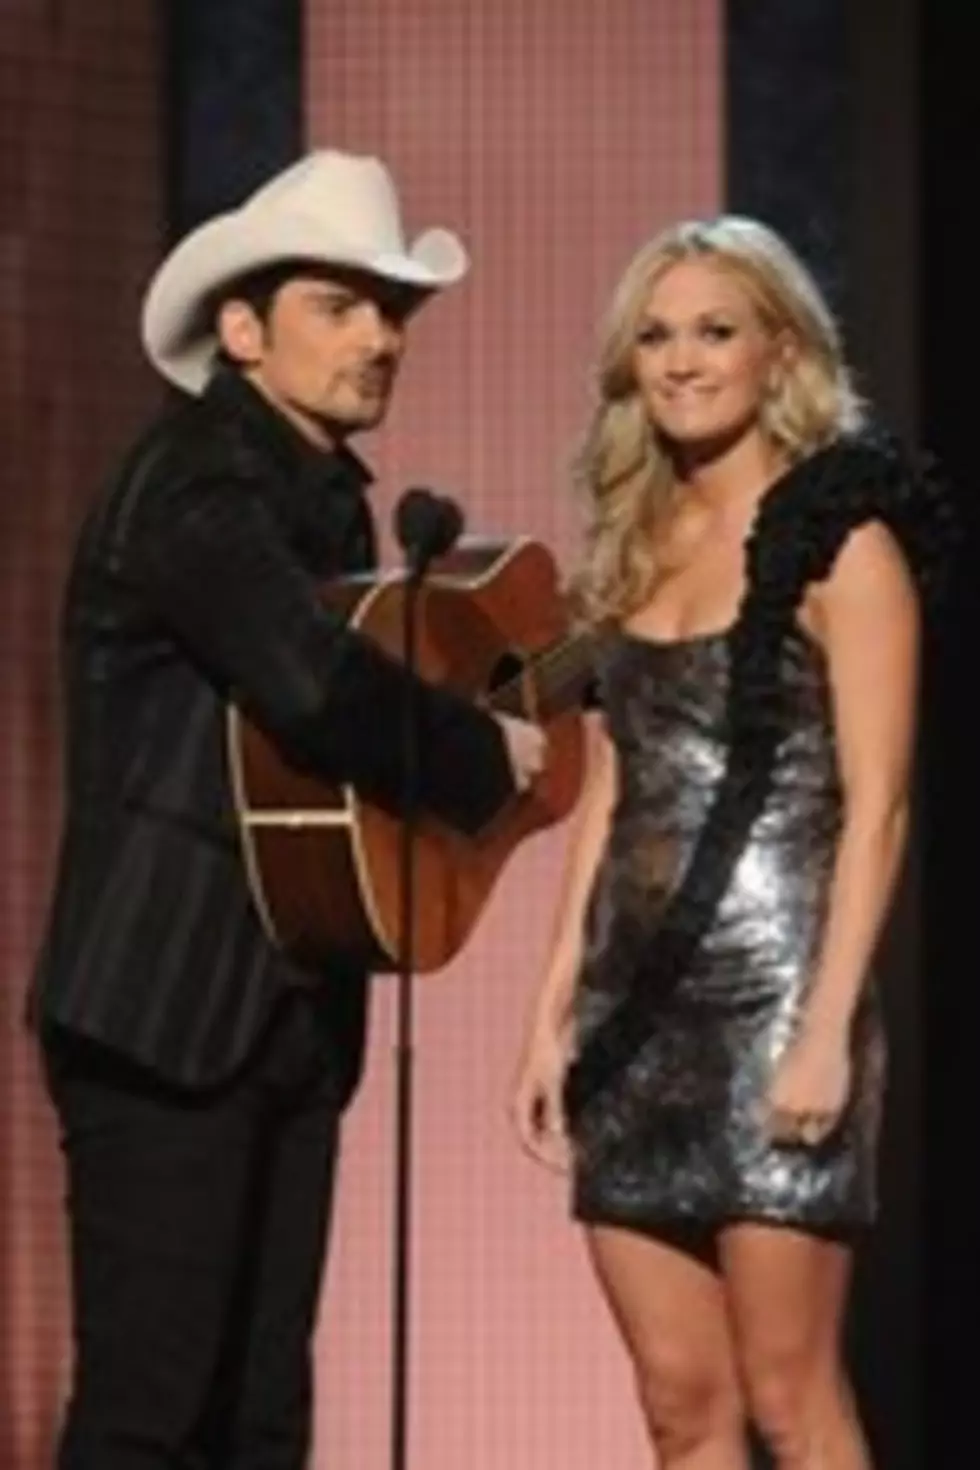 Brad Paisley And Carrie Underwood Weren’t Sure “Remind Me” Would Be Memorable